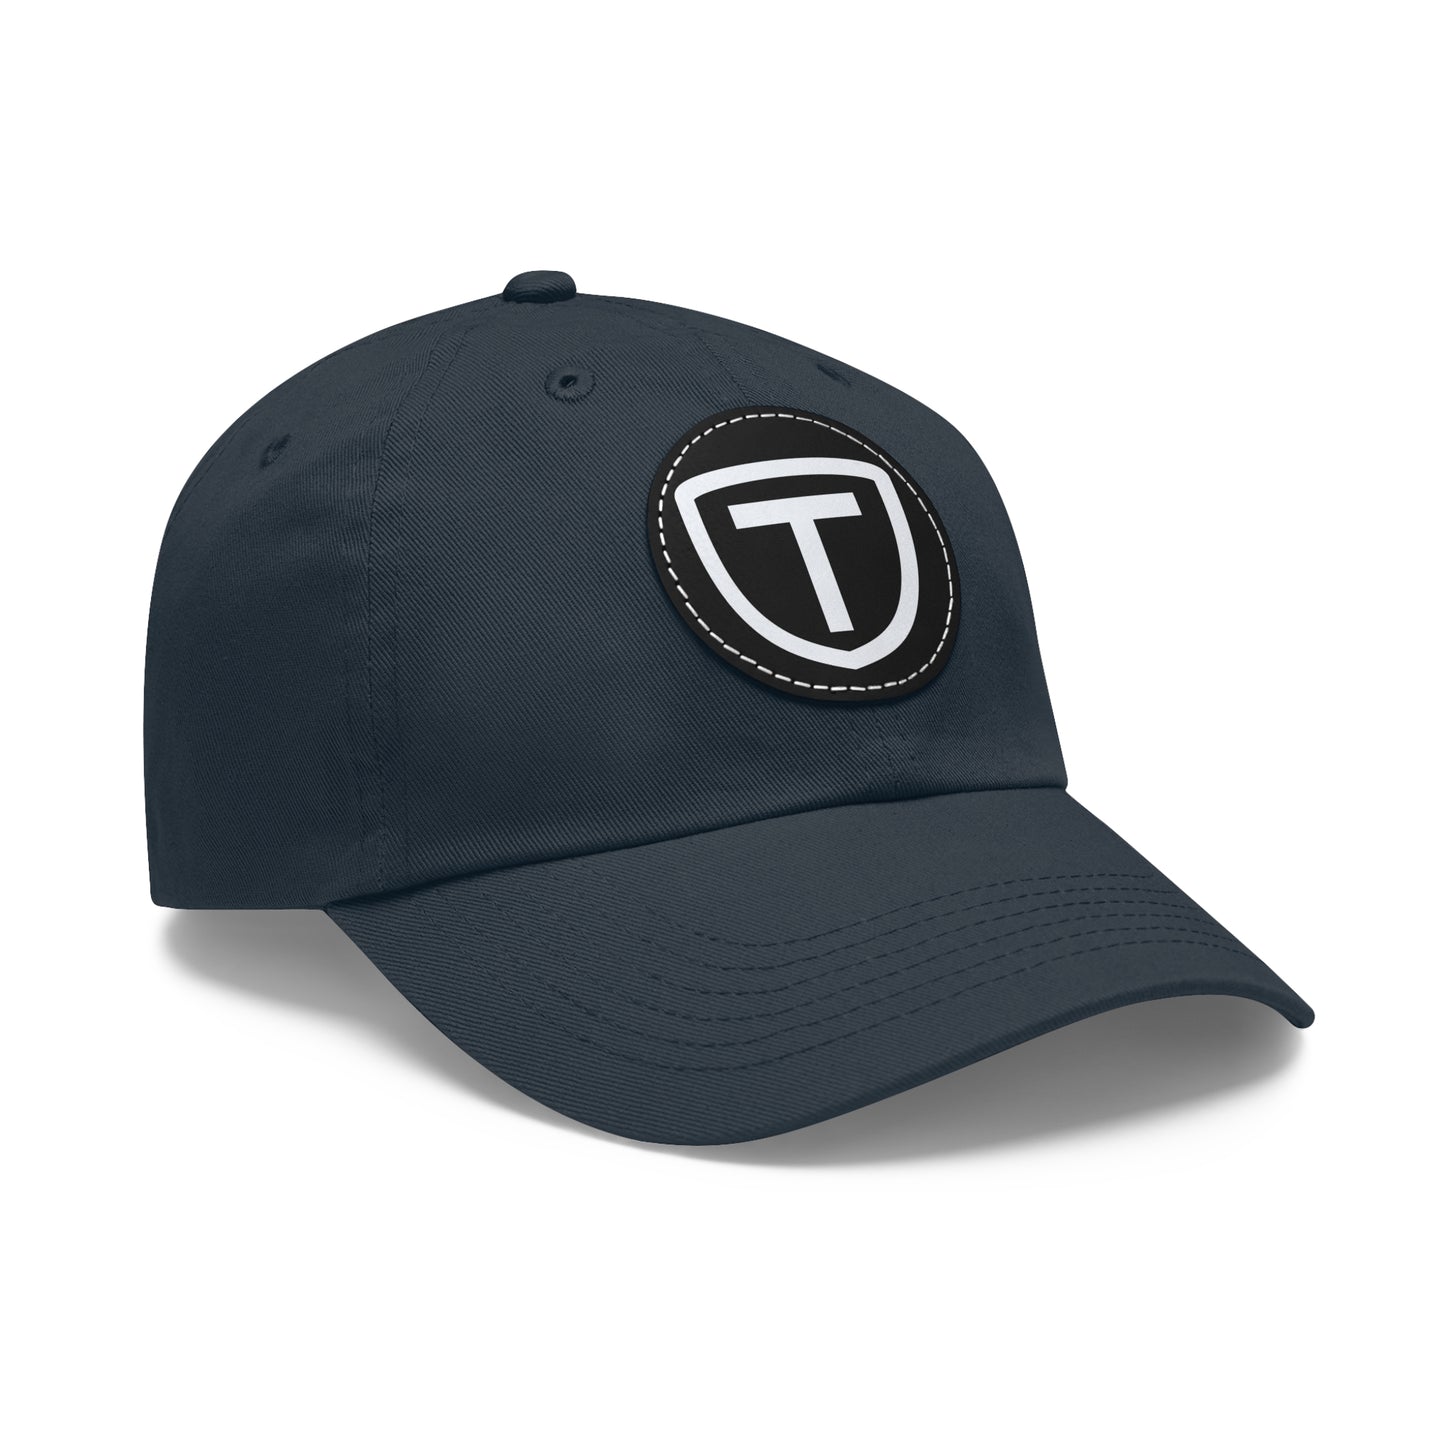 Shield With T Logo - Hat With Circular Leather Patch - White